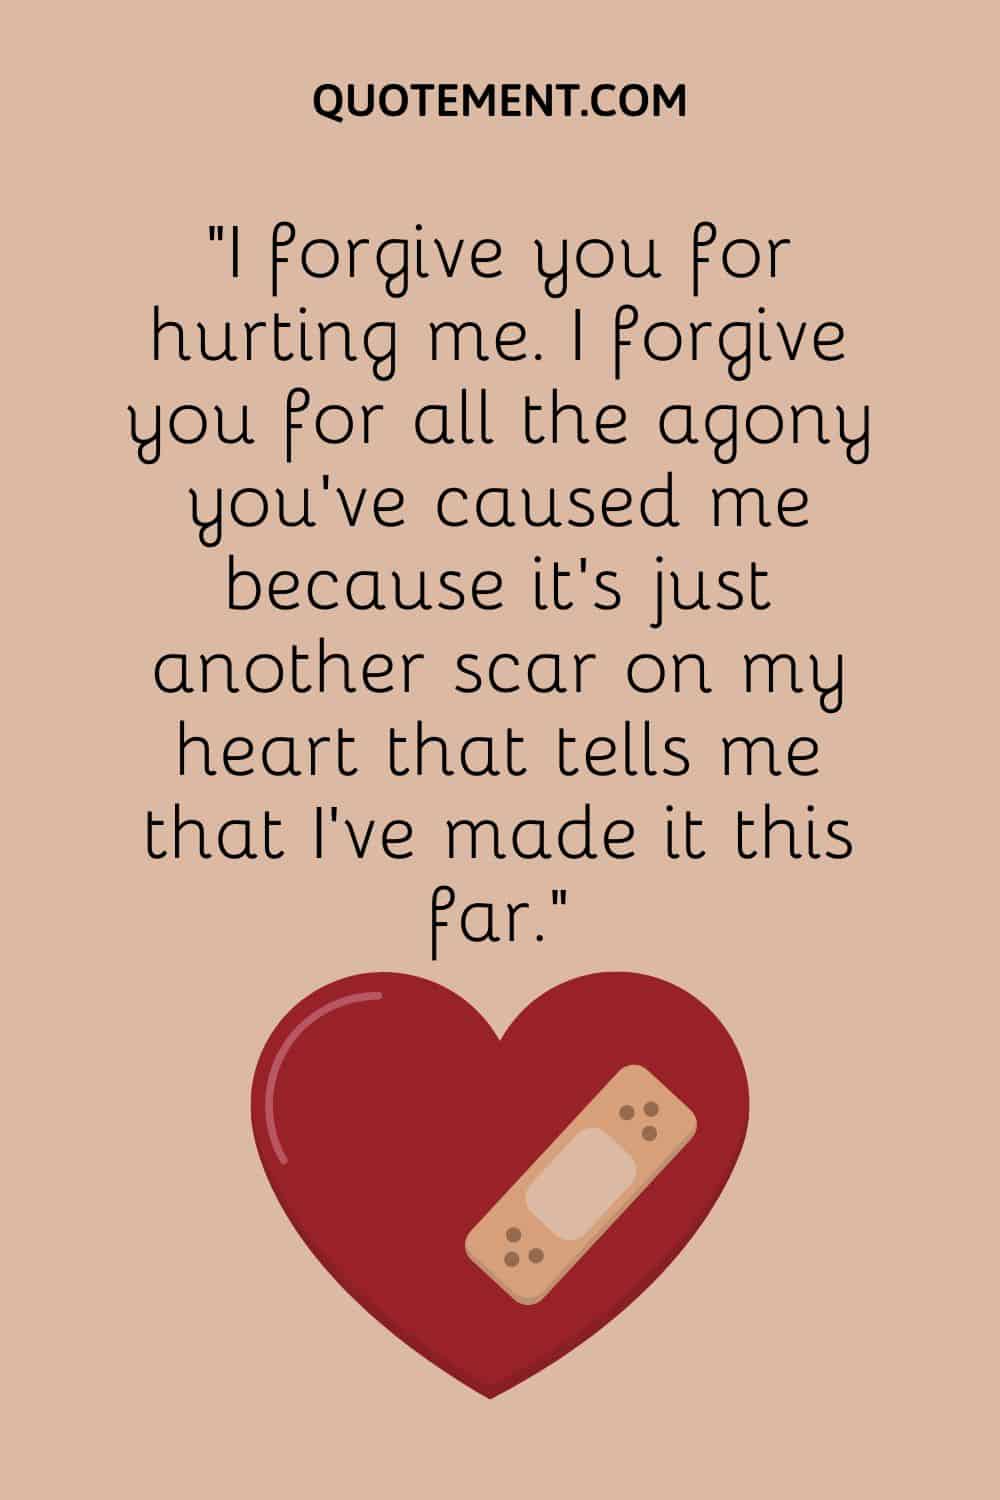 I forgive you for all the agony you’ve caused me